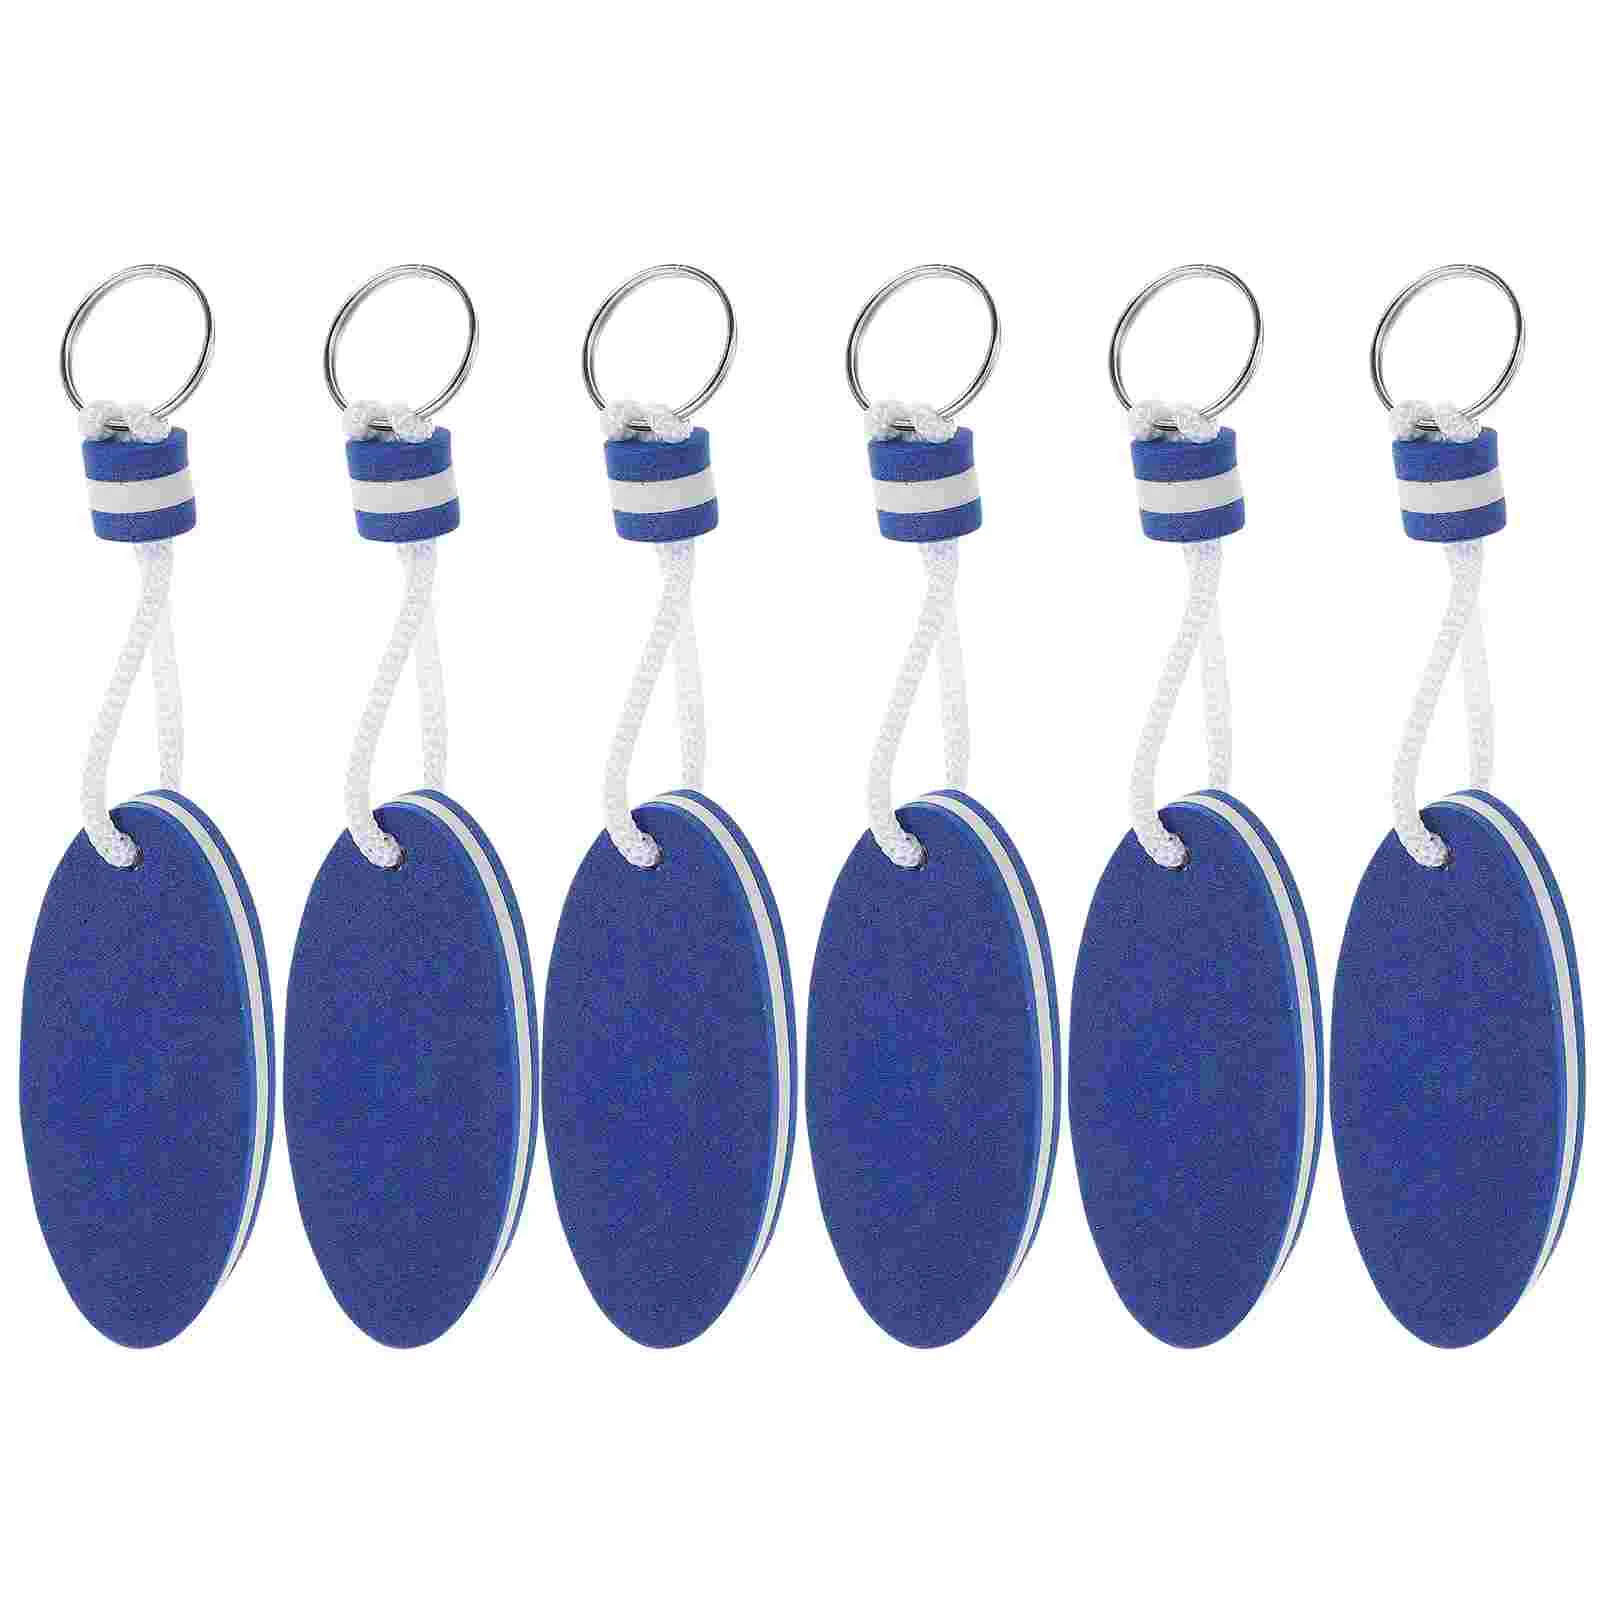 

6 Pcs Floats Keychains Boating Must Haves Colored Sports Decor Ring Floating Water Keys Eva Portable Rings